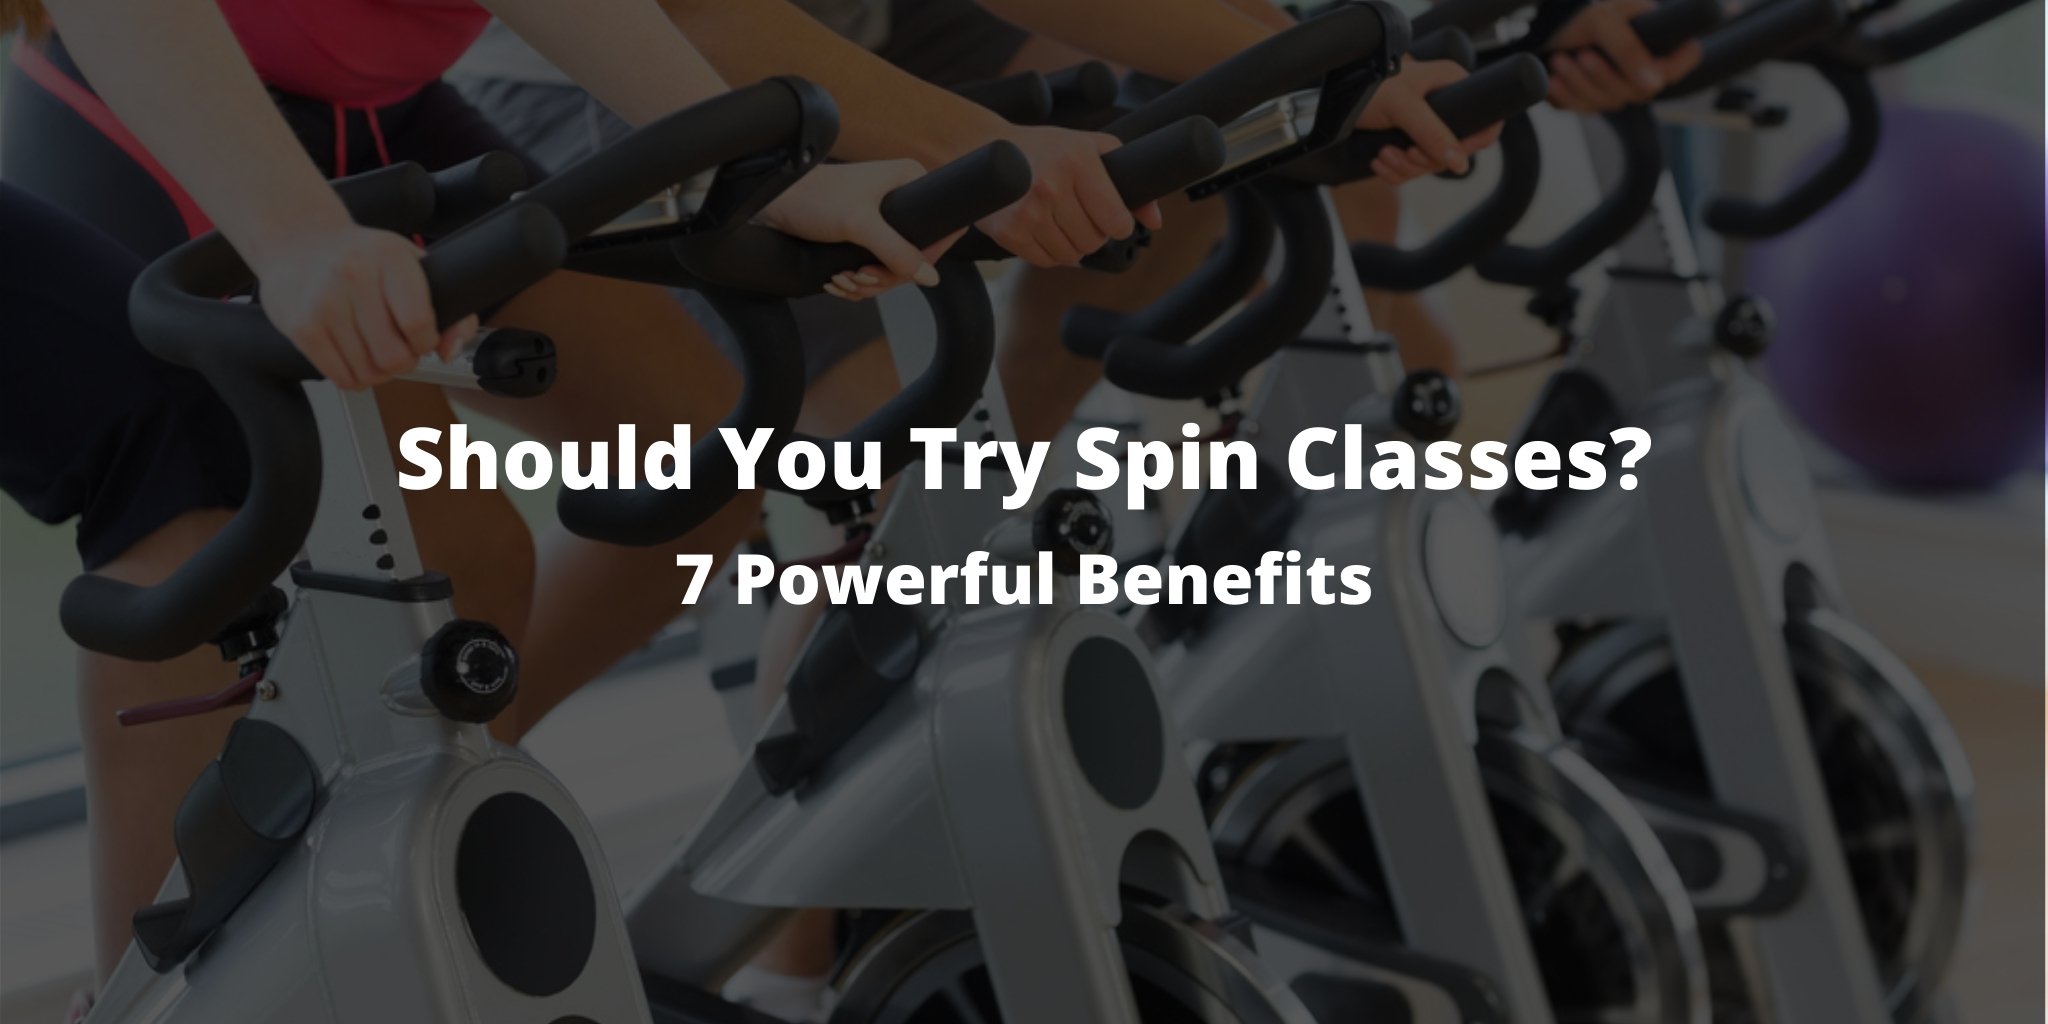 Should You Try Spin Classes? 7 Powerful Benefits